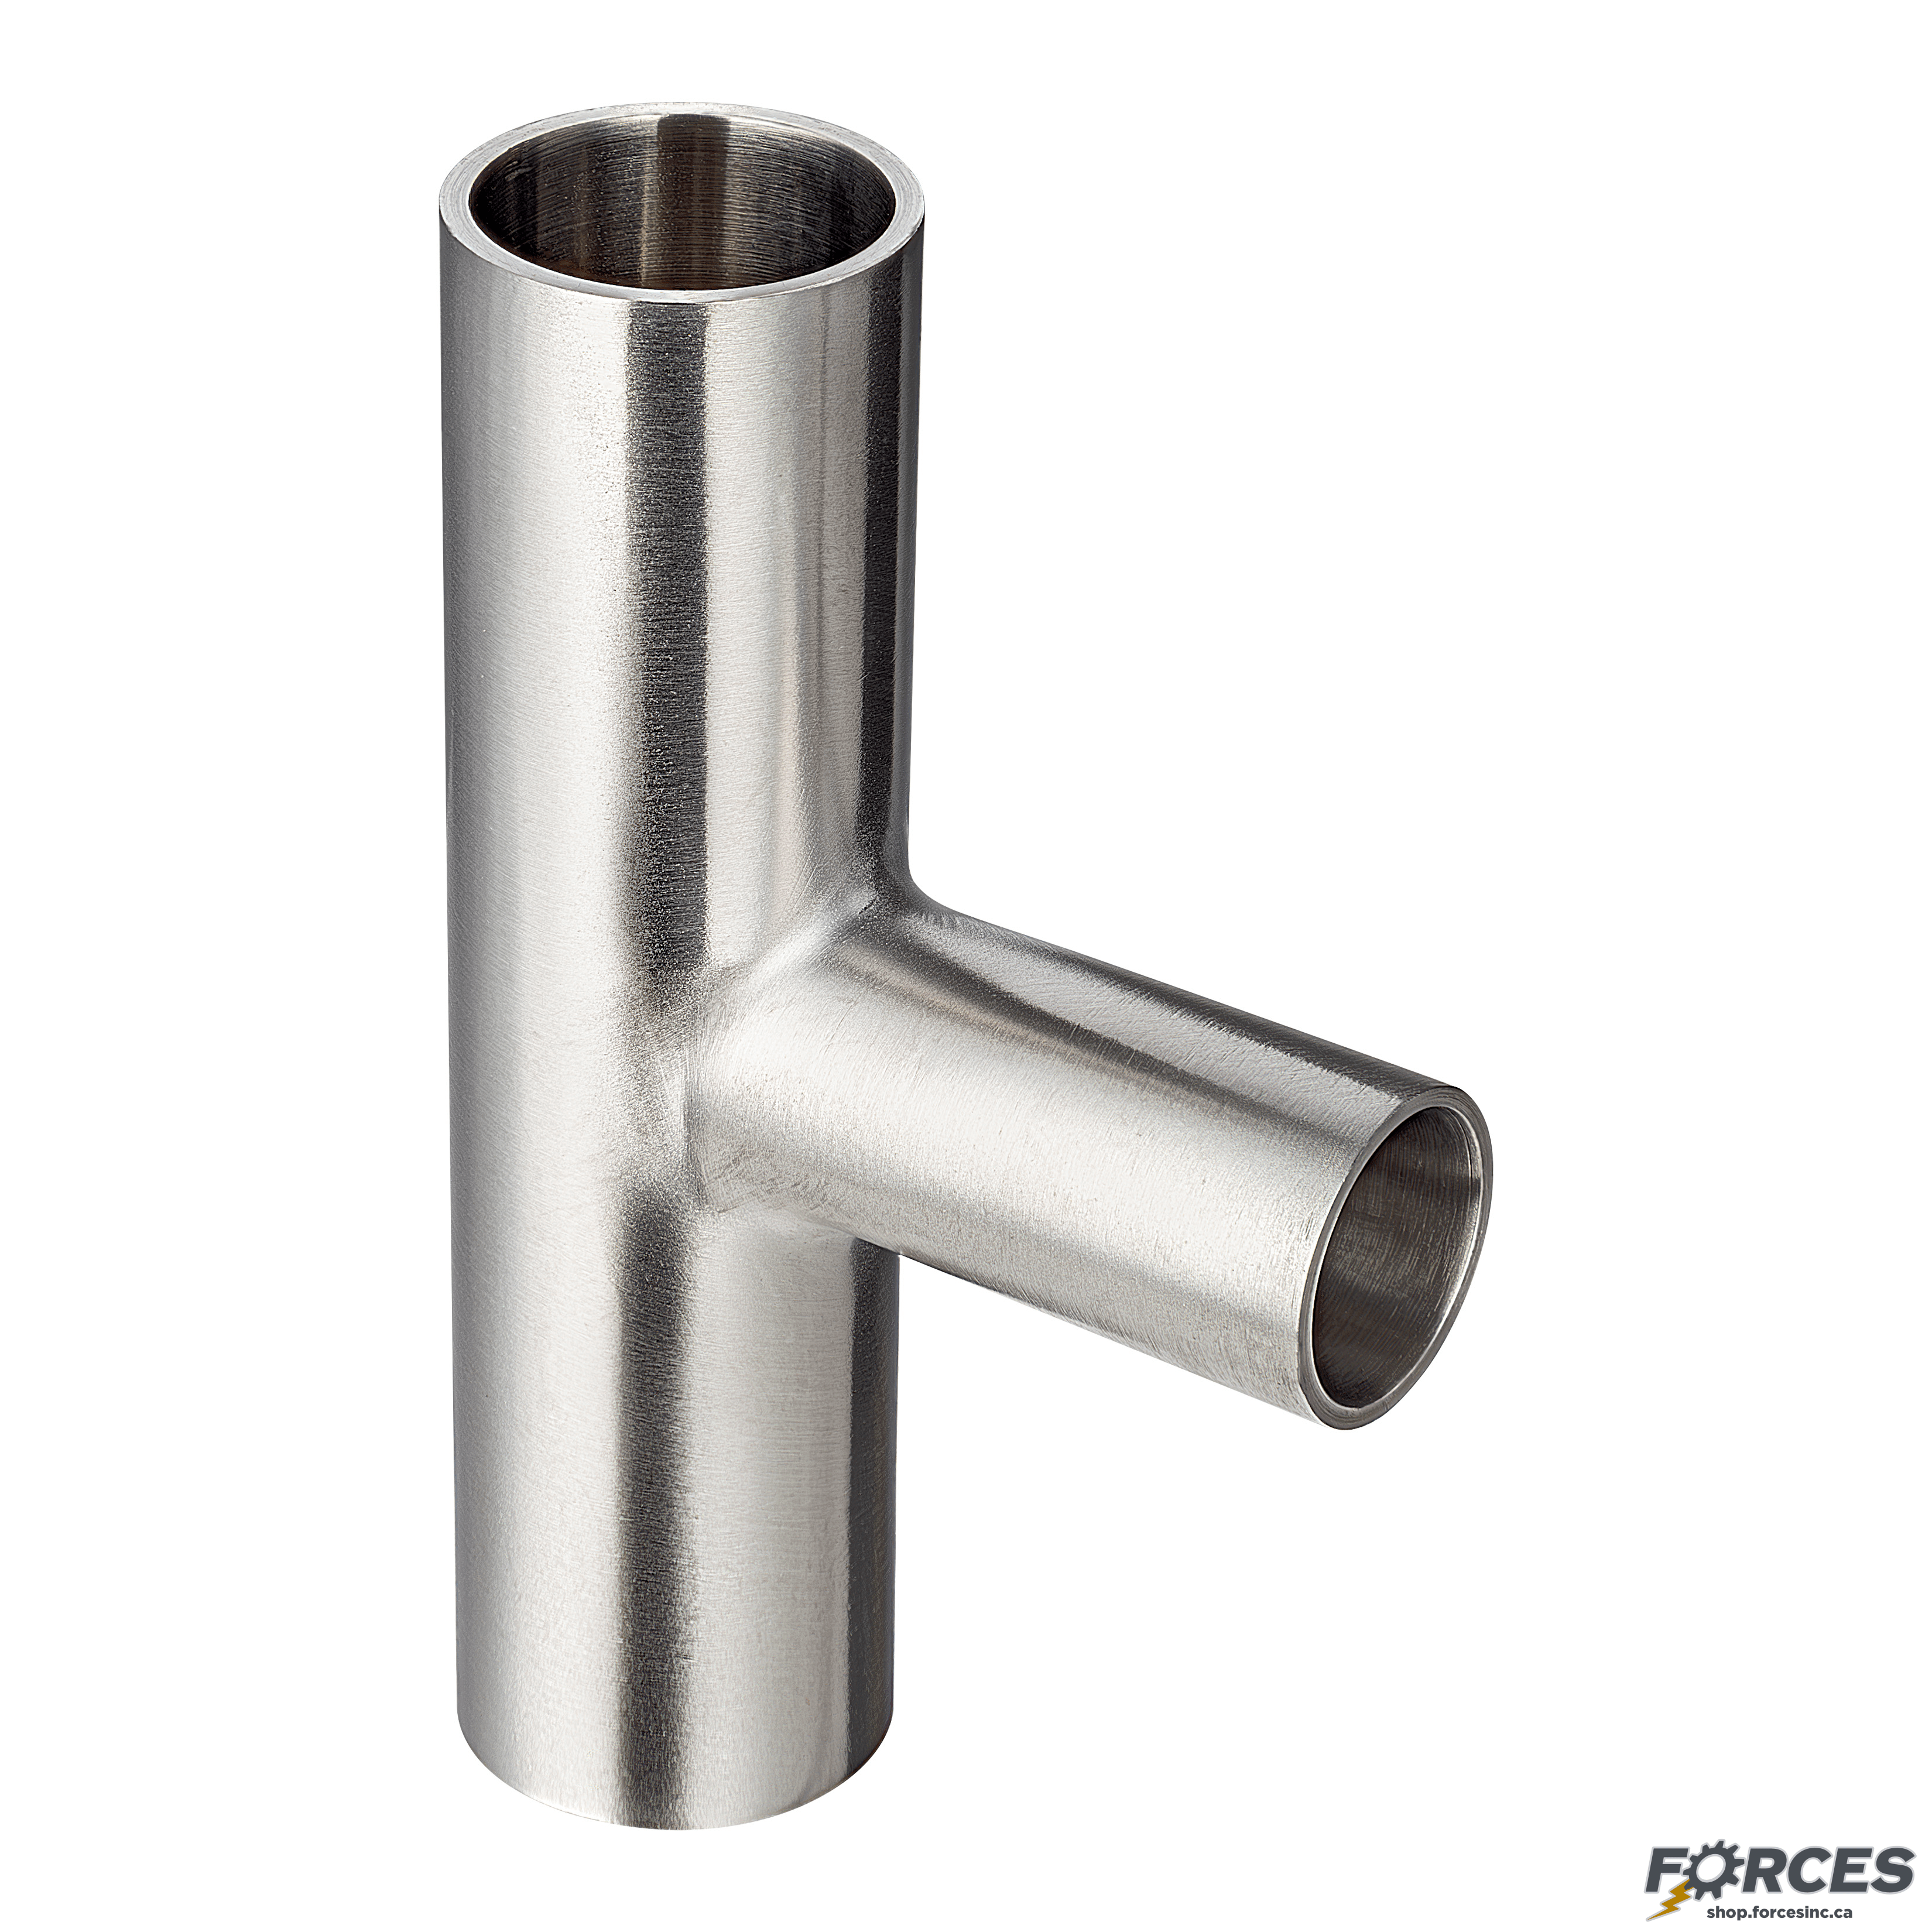 1-1/2" x 3/4" Butt Weld Tee Reducer - Stainless Steel 316 - Forces Inc